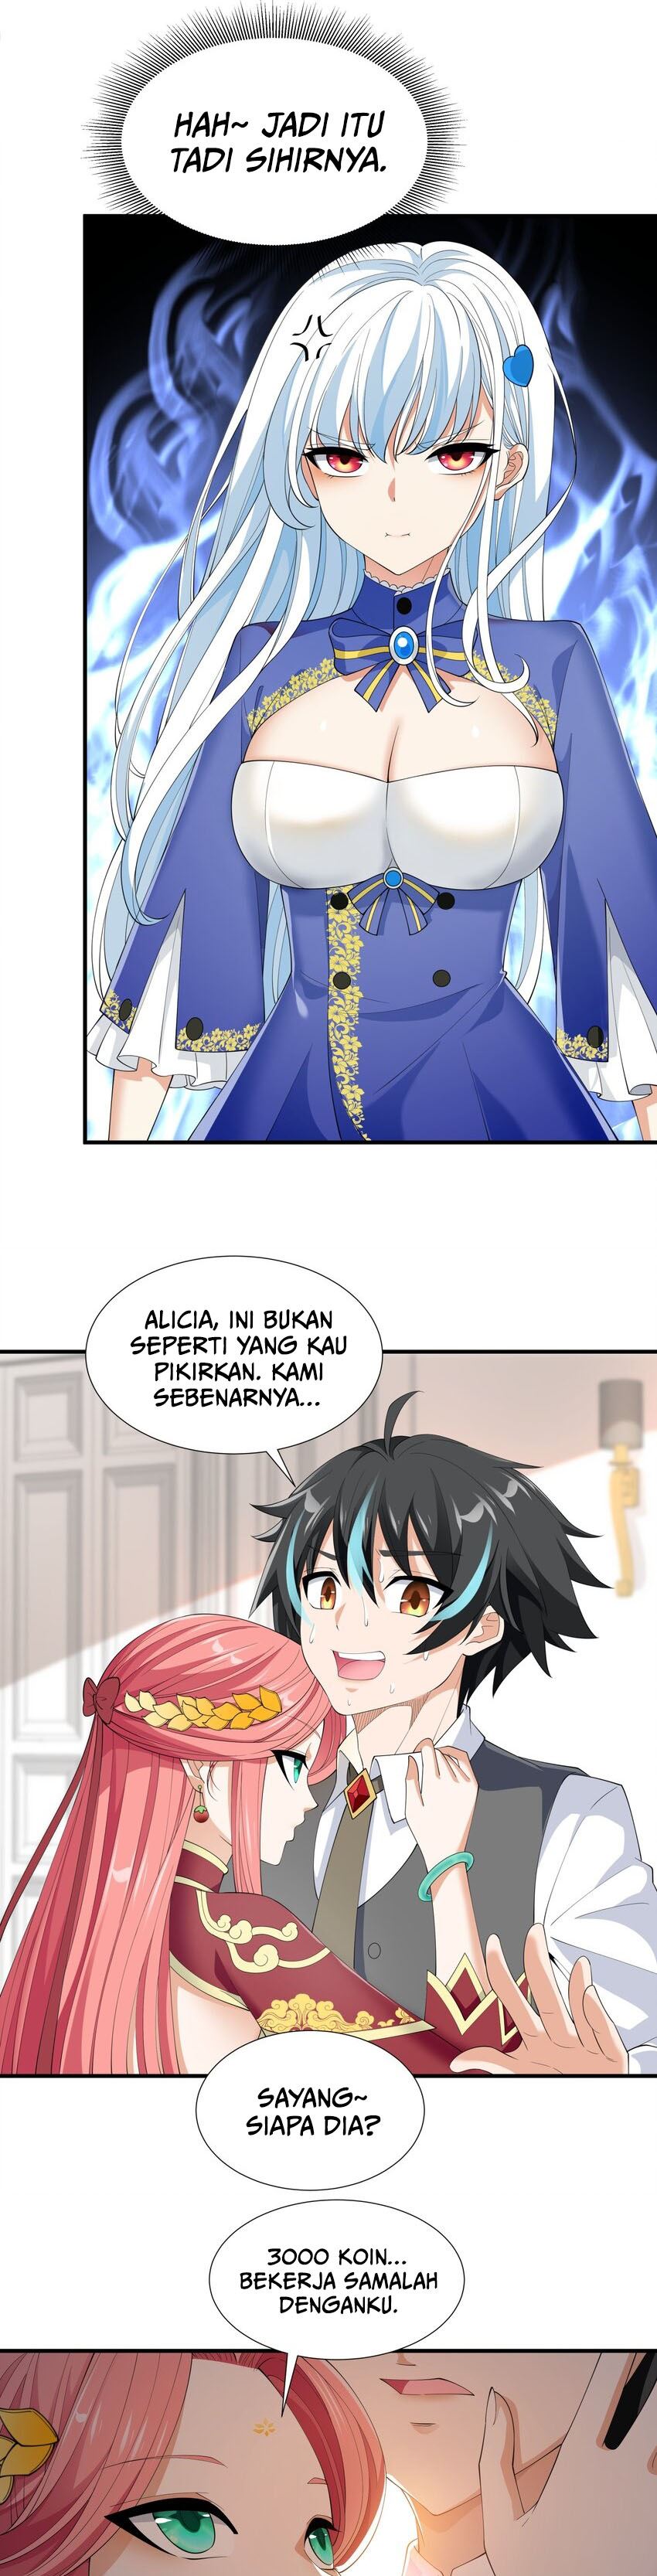 Dilarang COPAS - situs resmi www.mangacanblog.com - Komik little tyrant doesnt want to meet with a bad end 033 - chapter 33 34 Indonesia little tyrant doesnt want to meet with a bad end 033 - chapter 33 Terbaru 7|Baca Manga Komik Indonesia|Mangacan